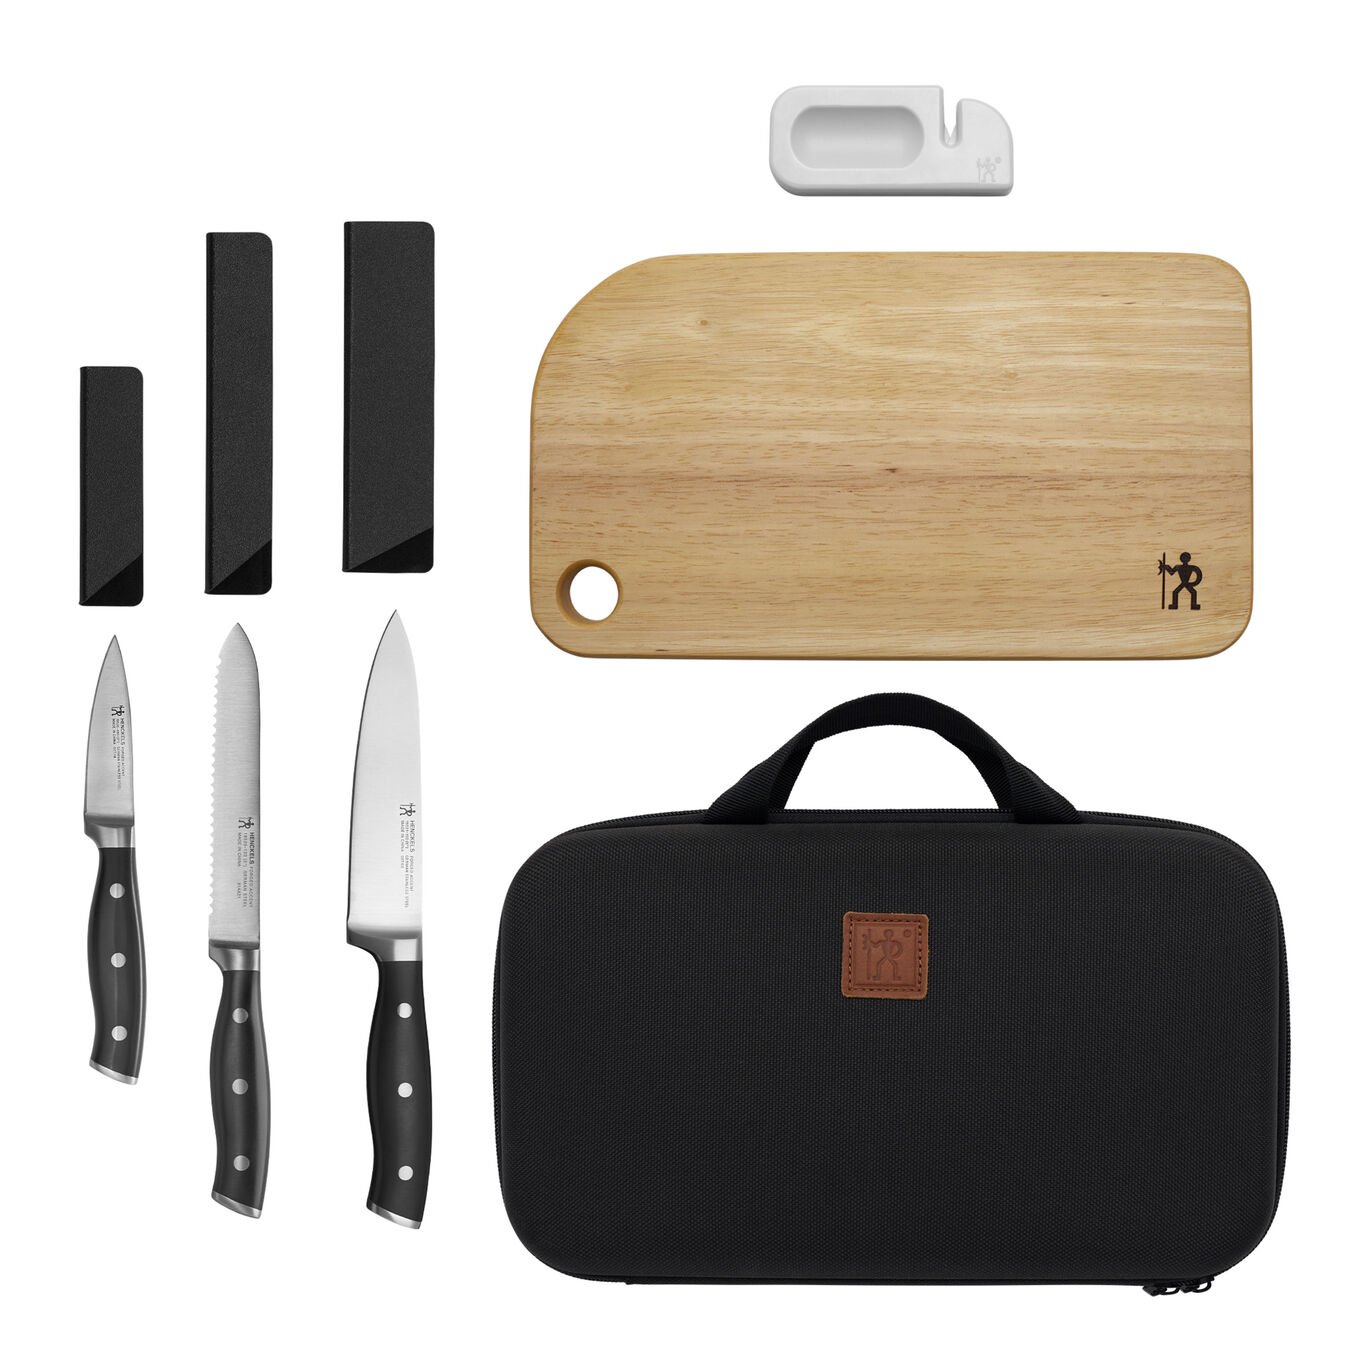 Buy Henckels Forged Accent Knife roll set